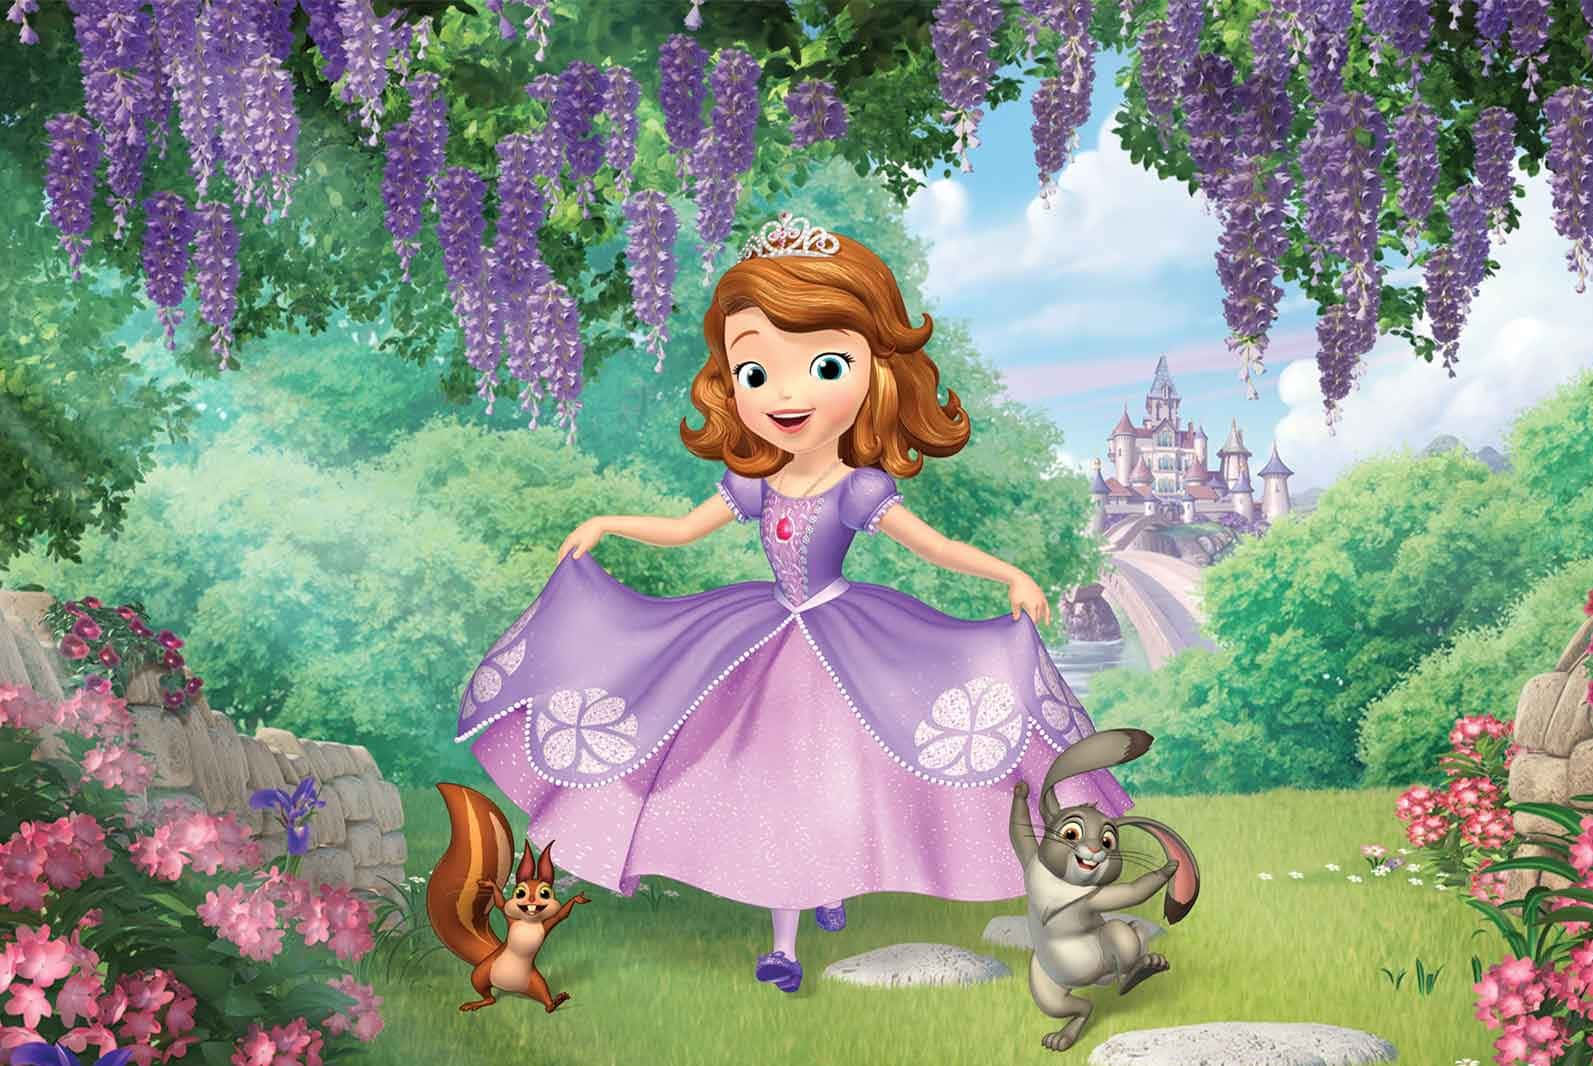 Join Sofia The First in her magical world Wallpaper